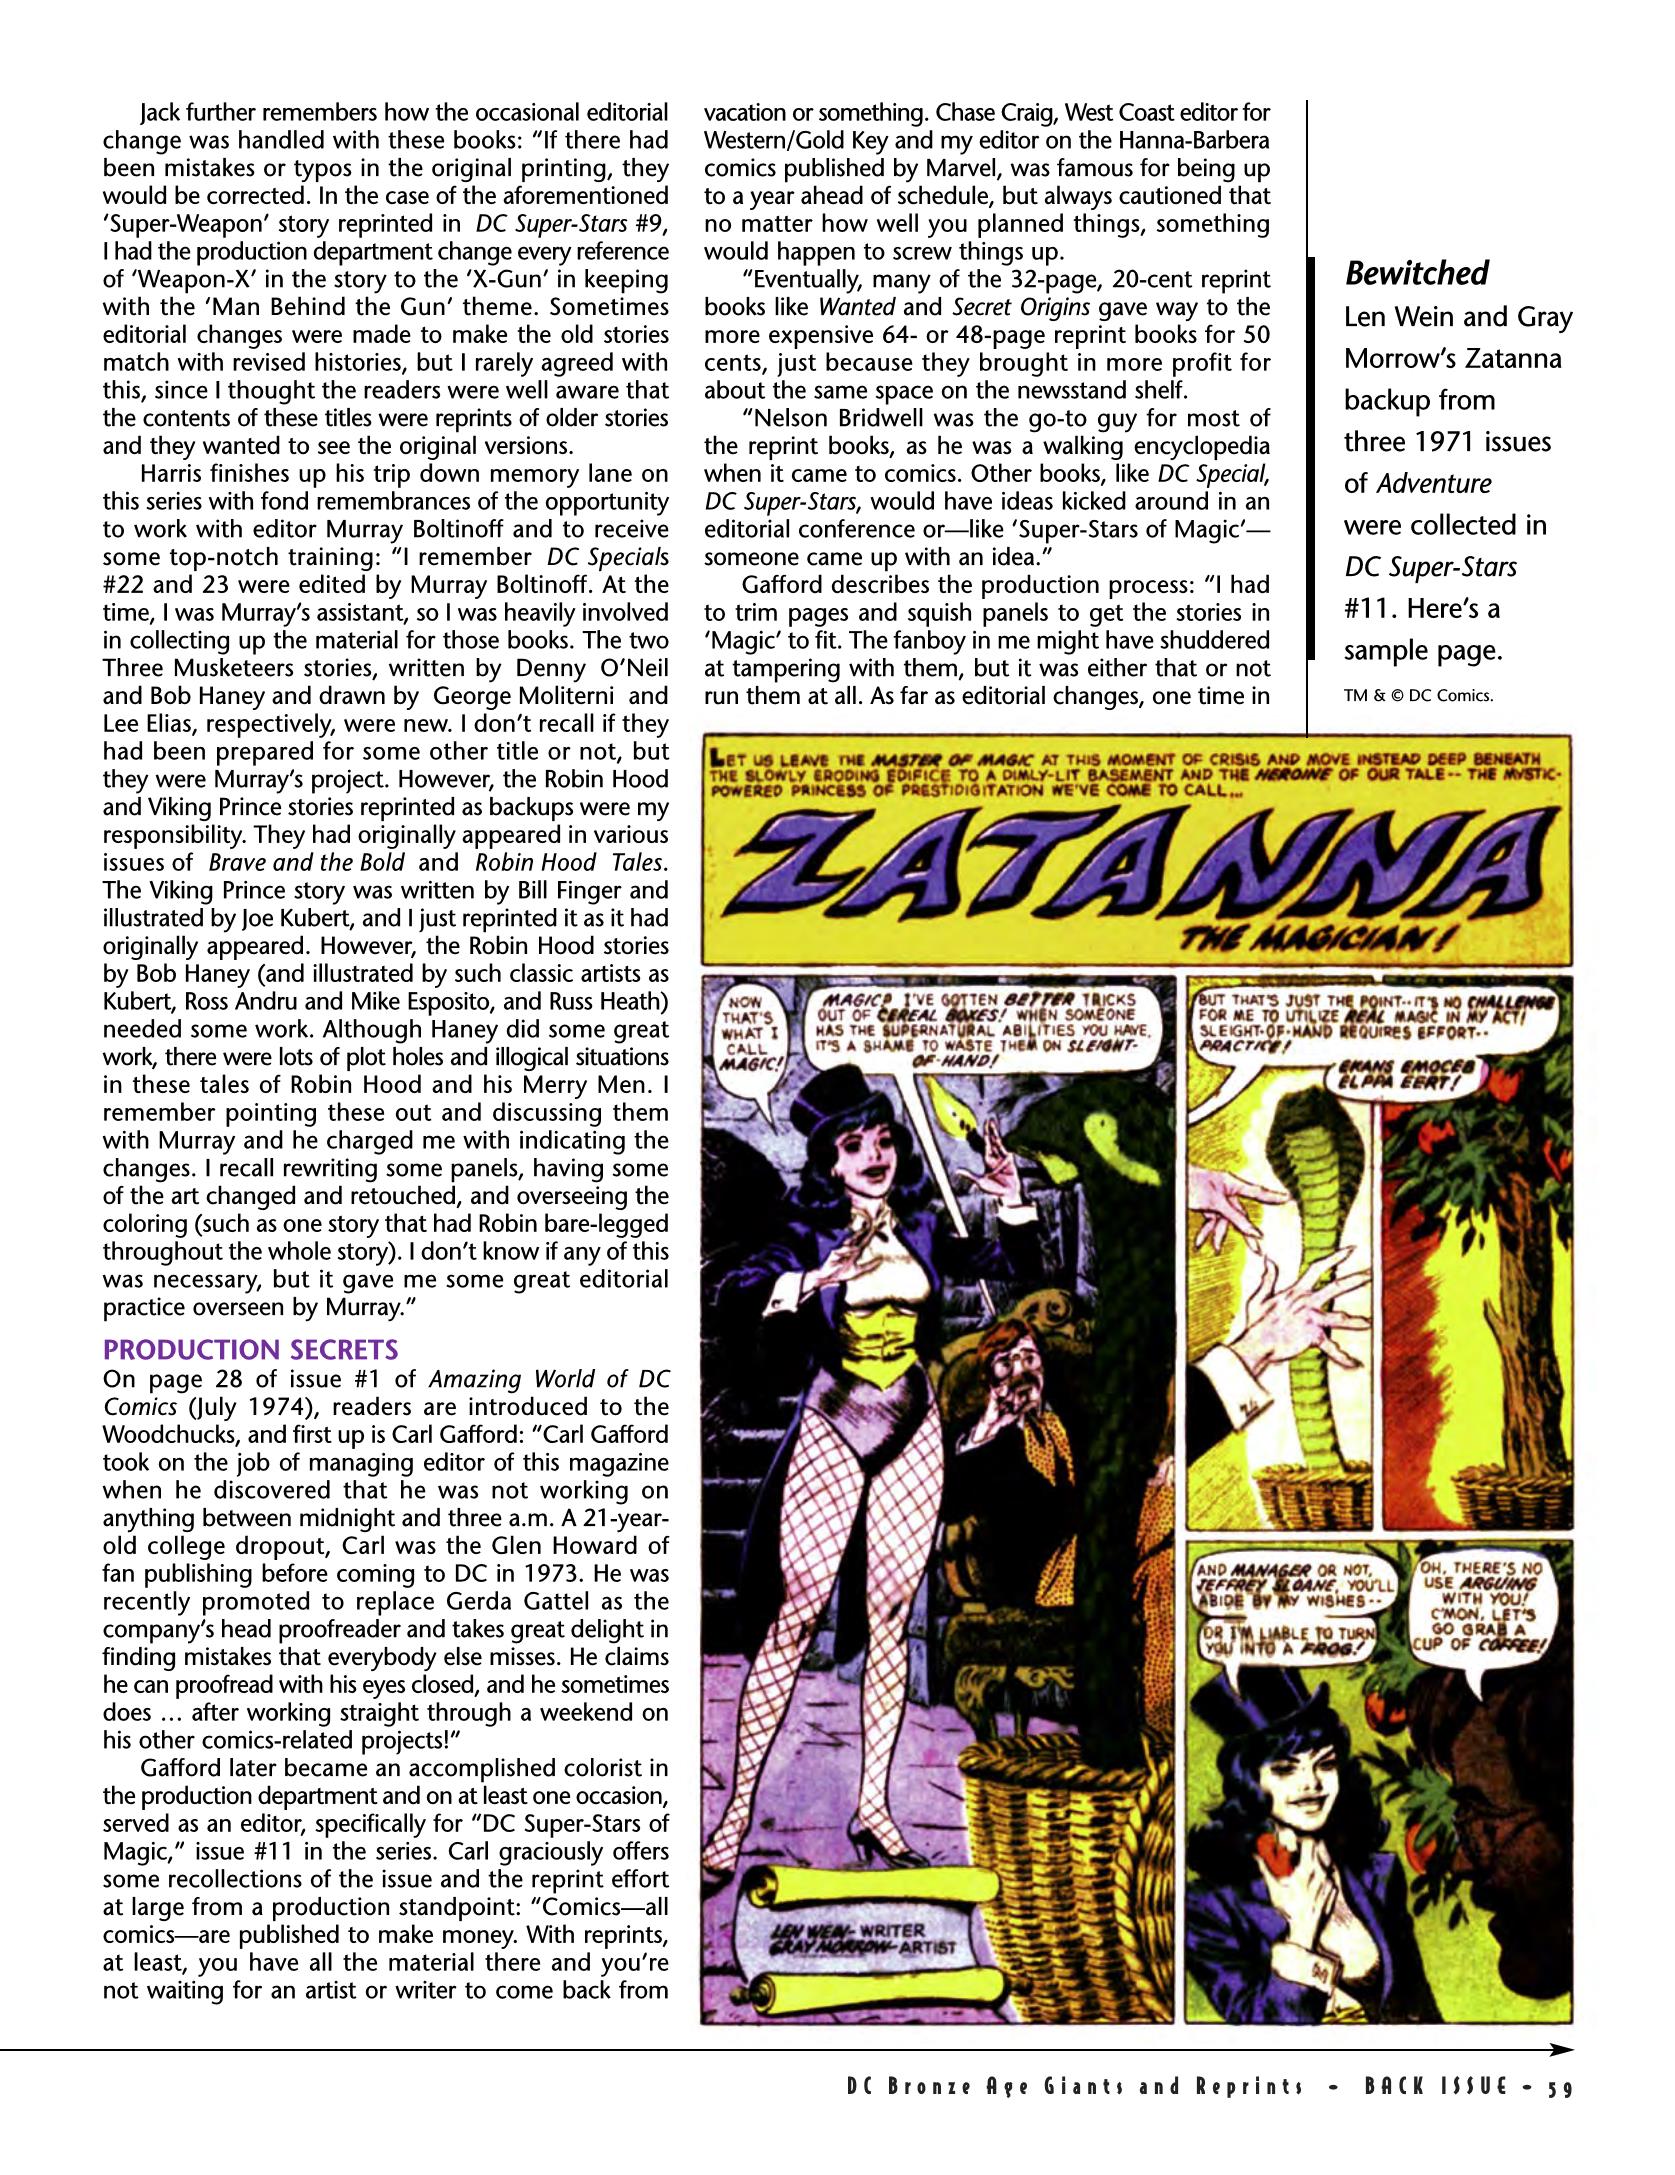 Read online Back Issue comic -  Issue #81 - 63